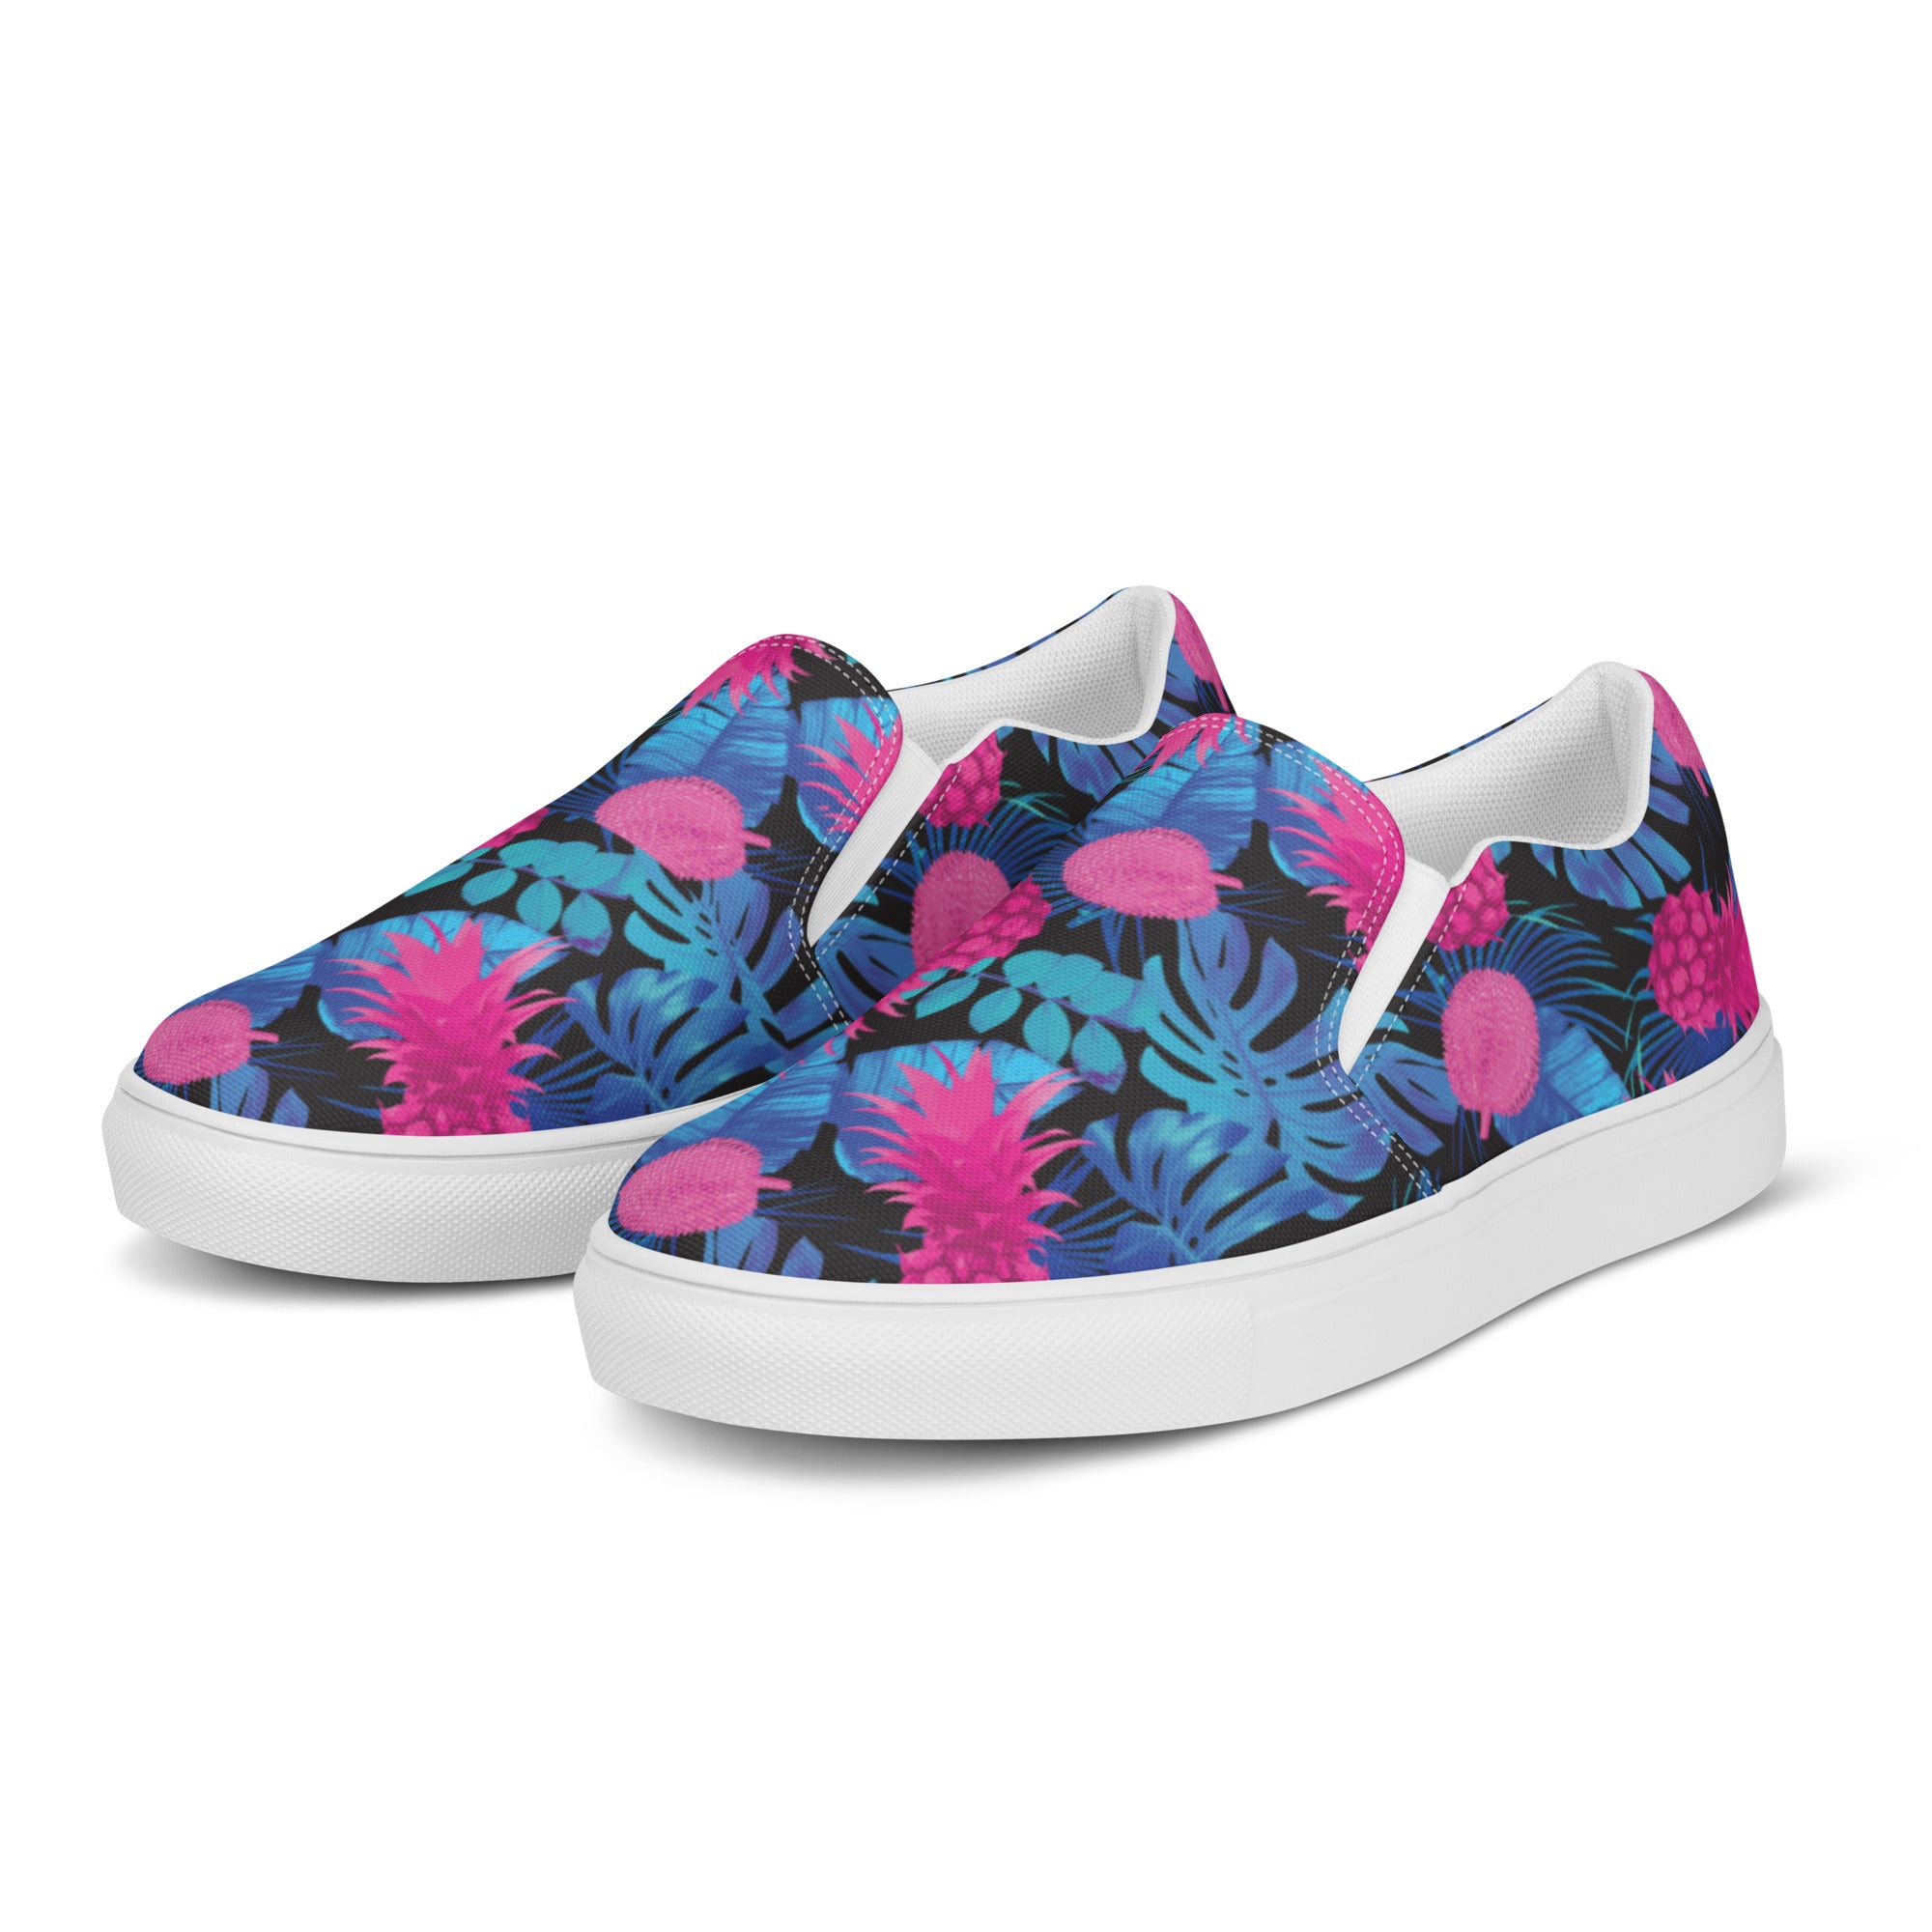 Rad Palm Pineapple Express Women’s Slip On Canvas Shoes